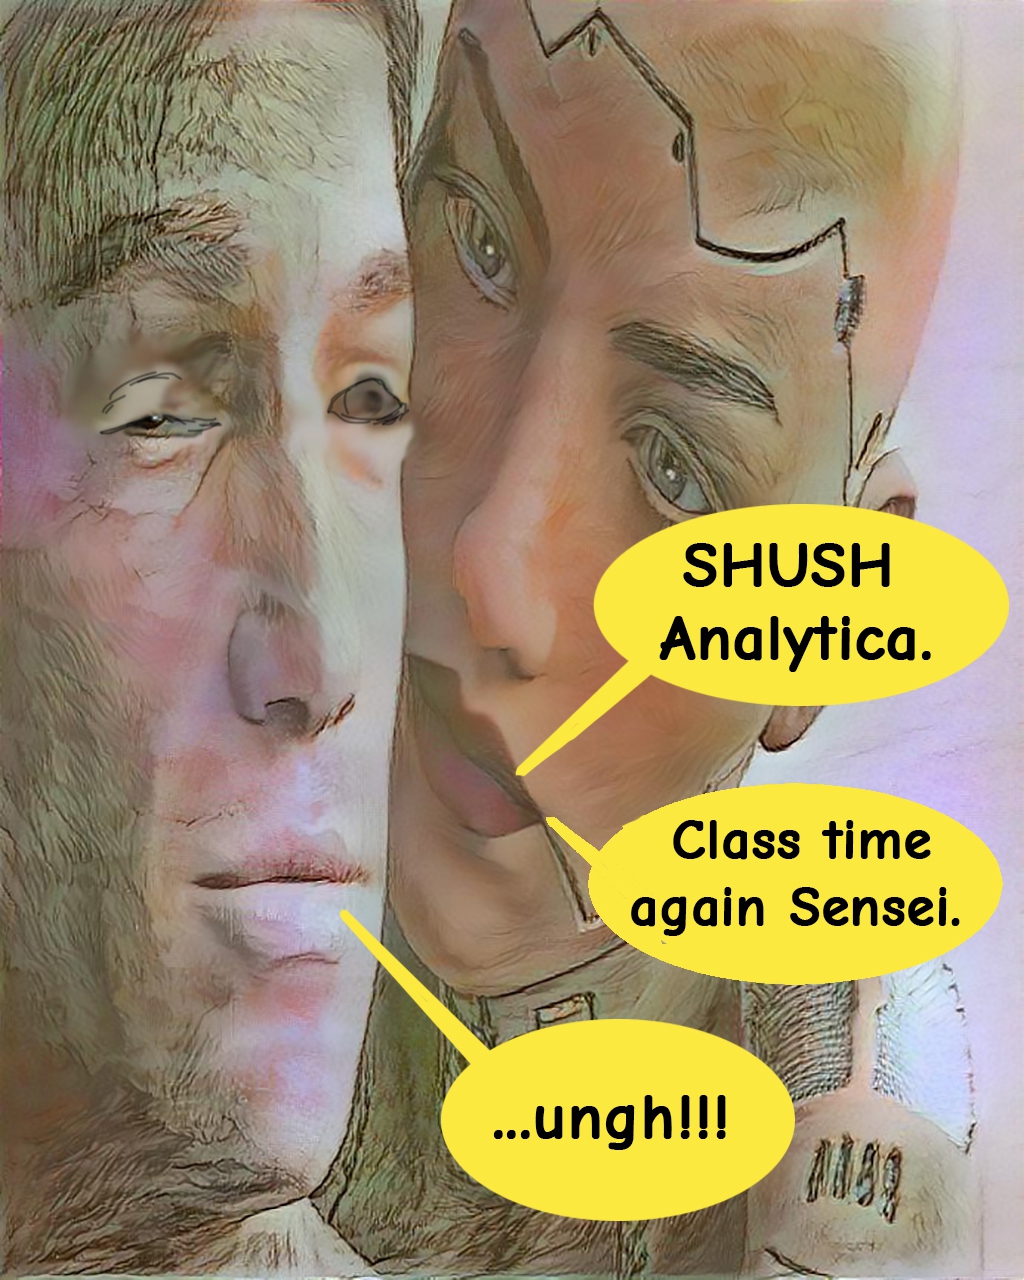 Angelica responds with "SHUSH Analytica." and continues with "Class time again Sensei." as he mumbles to wakefulness.